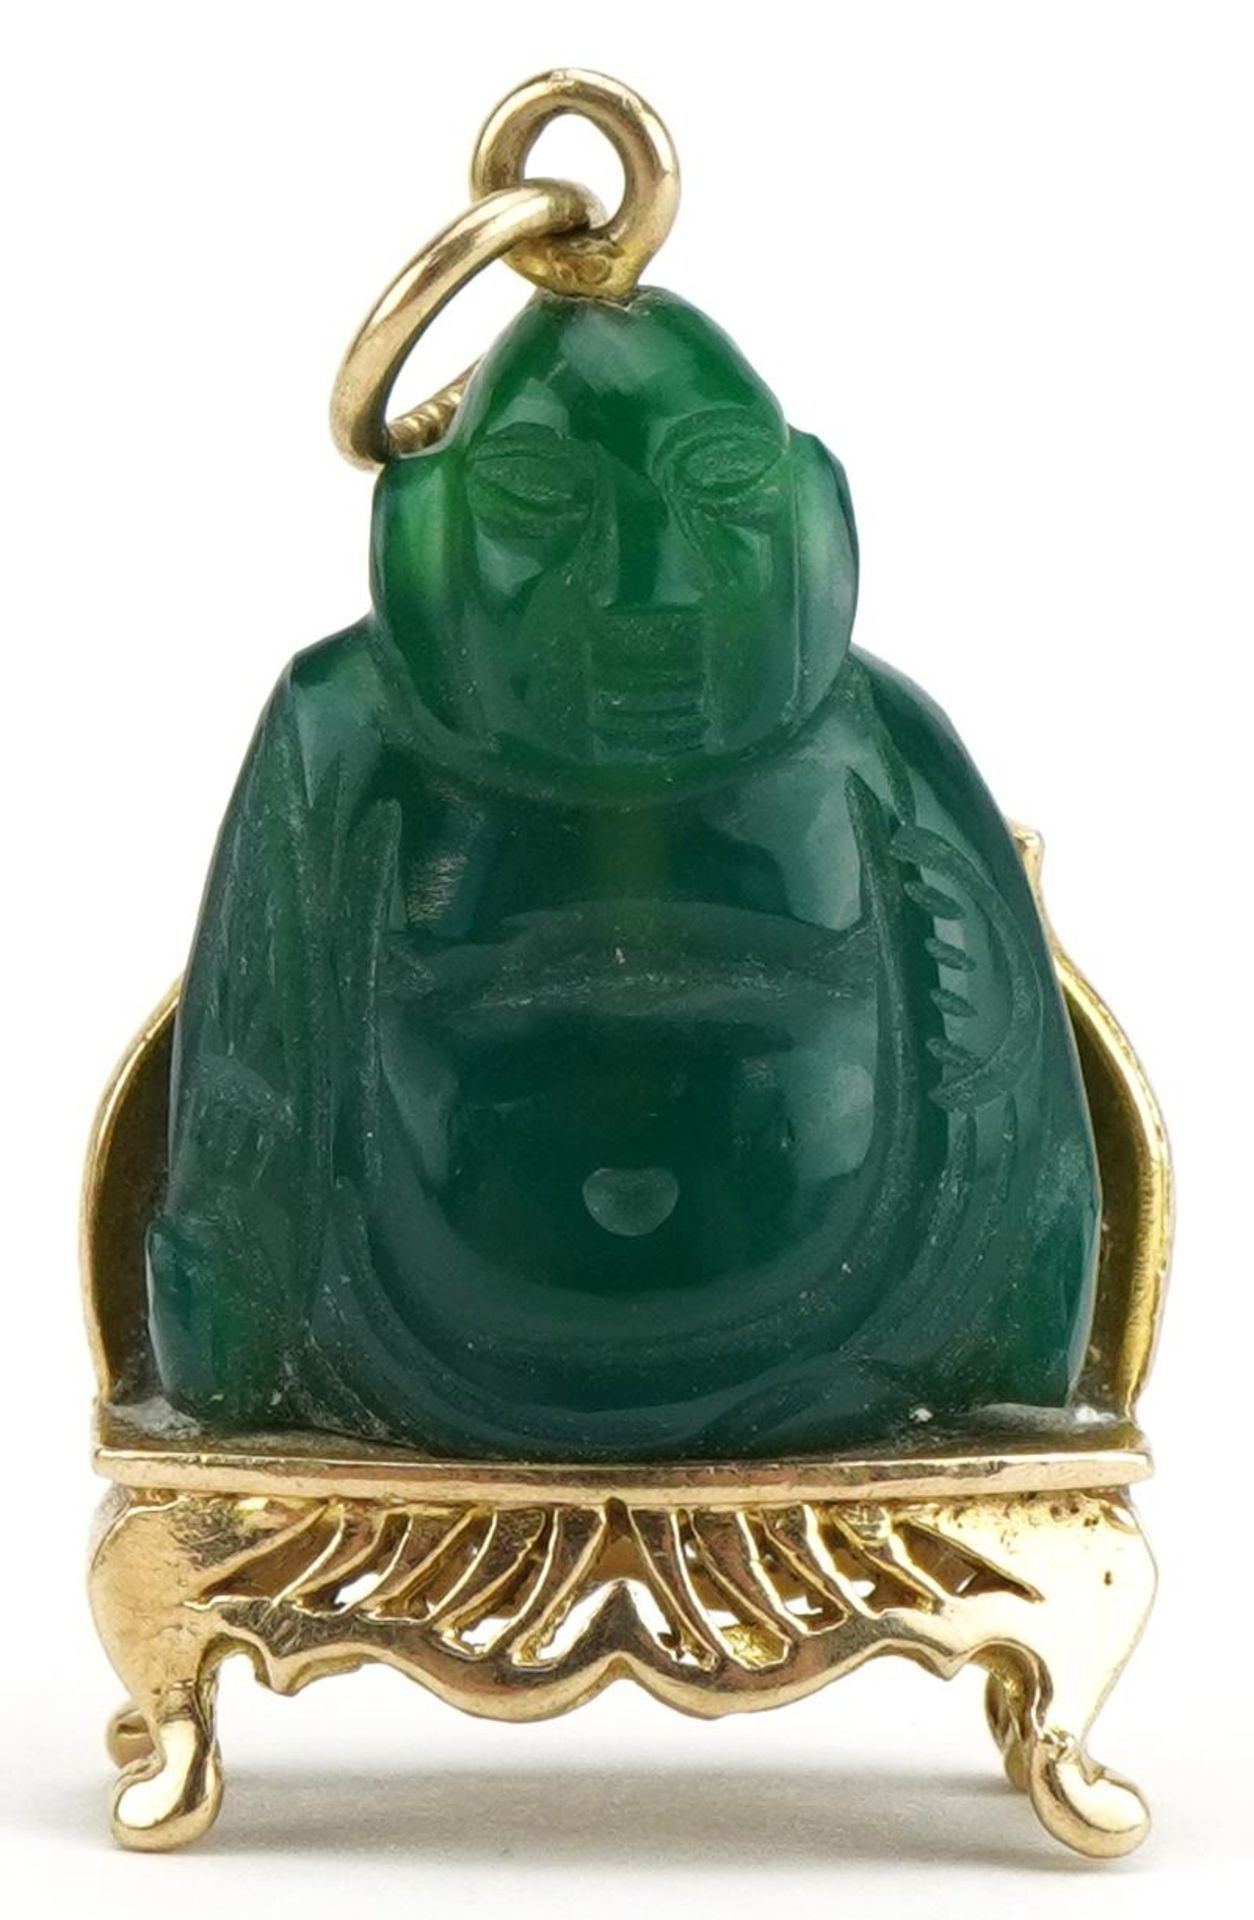 9ct gold and carved hardstone Chinese Buddha charm, 3cm high, 7.2g - Image 2 of 4